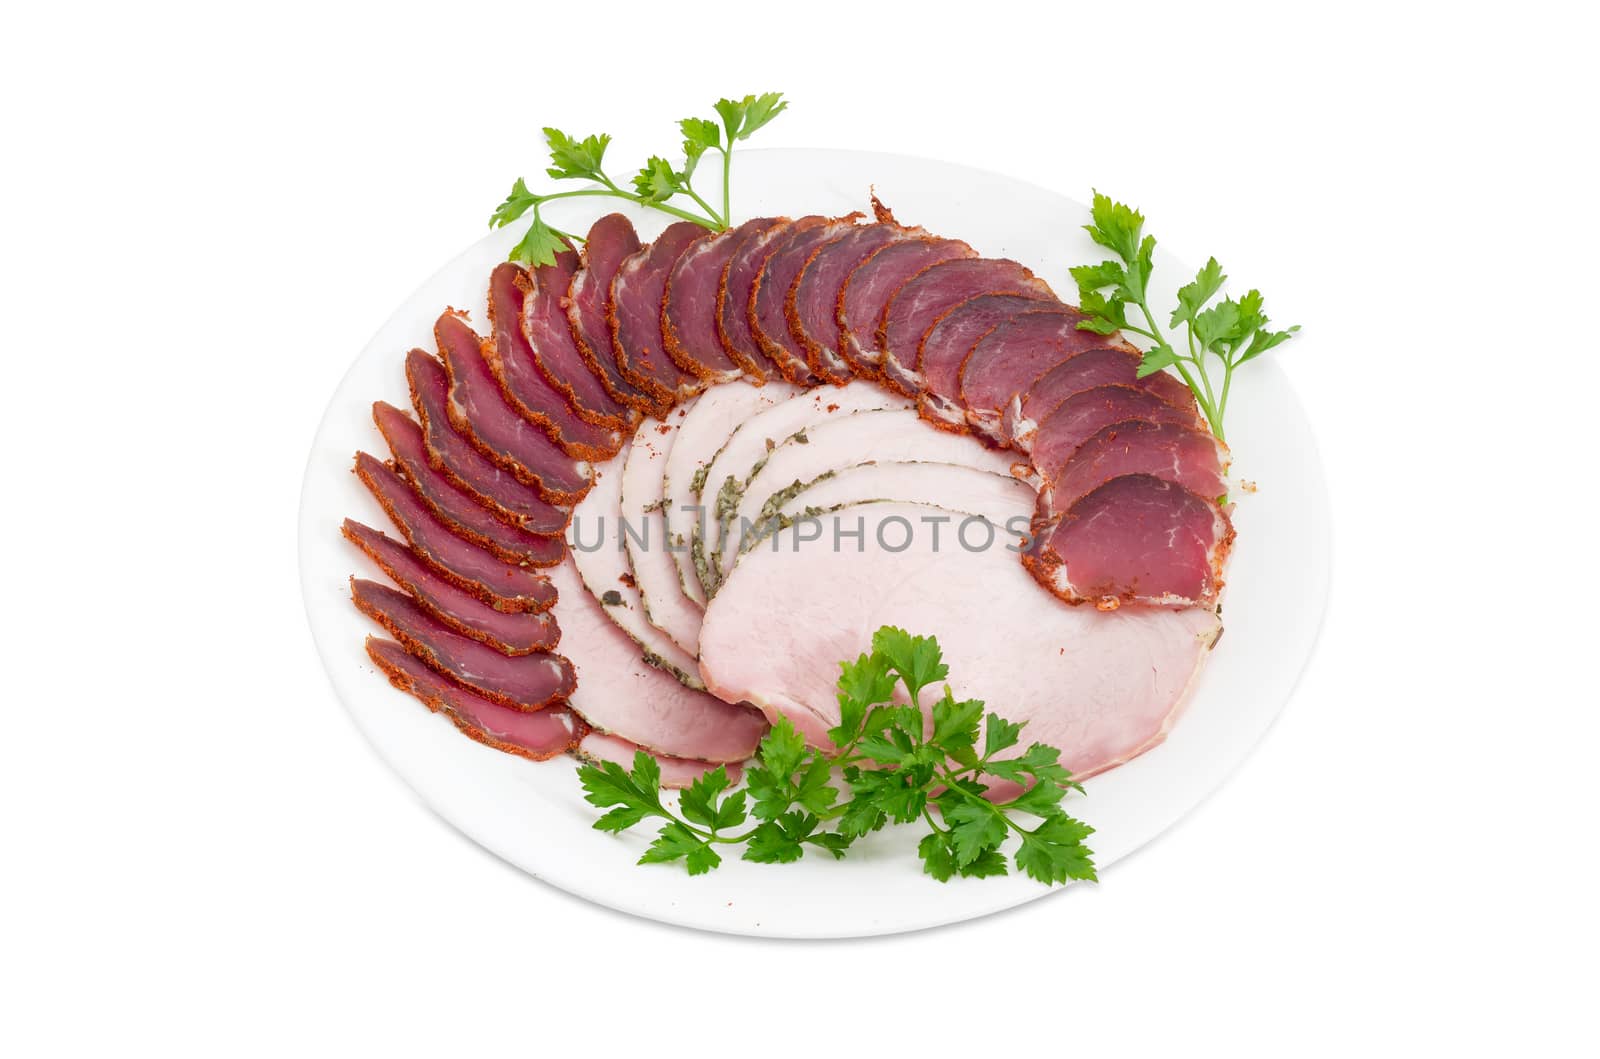 Sliced dried pork tenderloin and ham with parsley twigs by anmbph